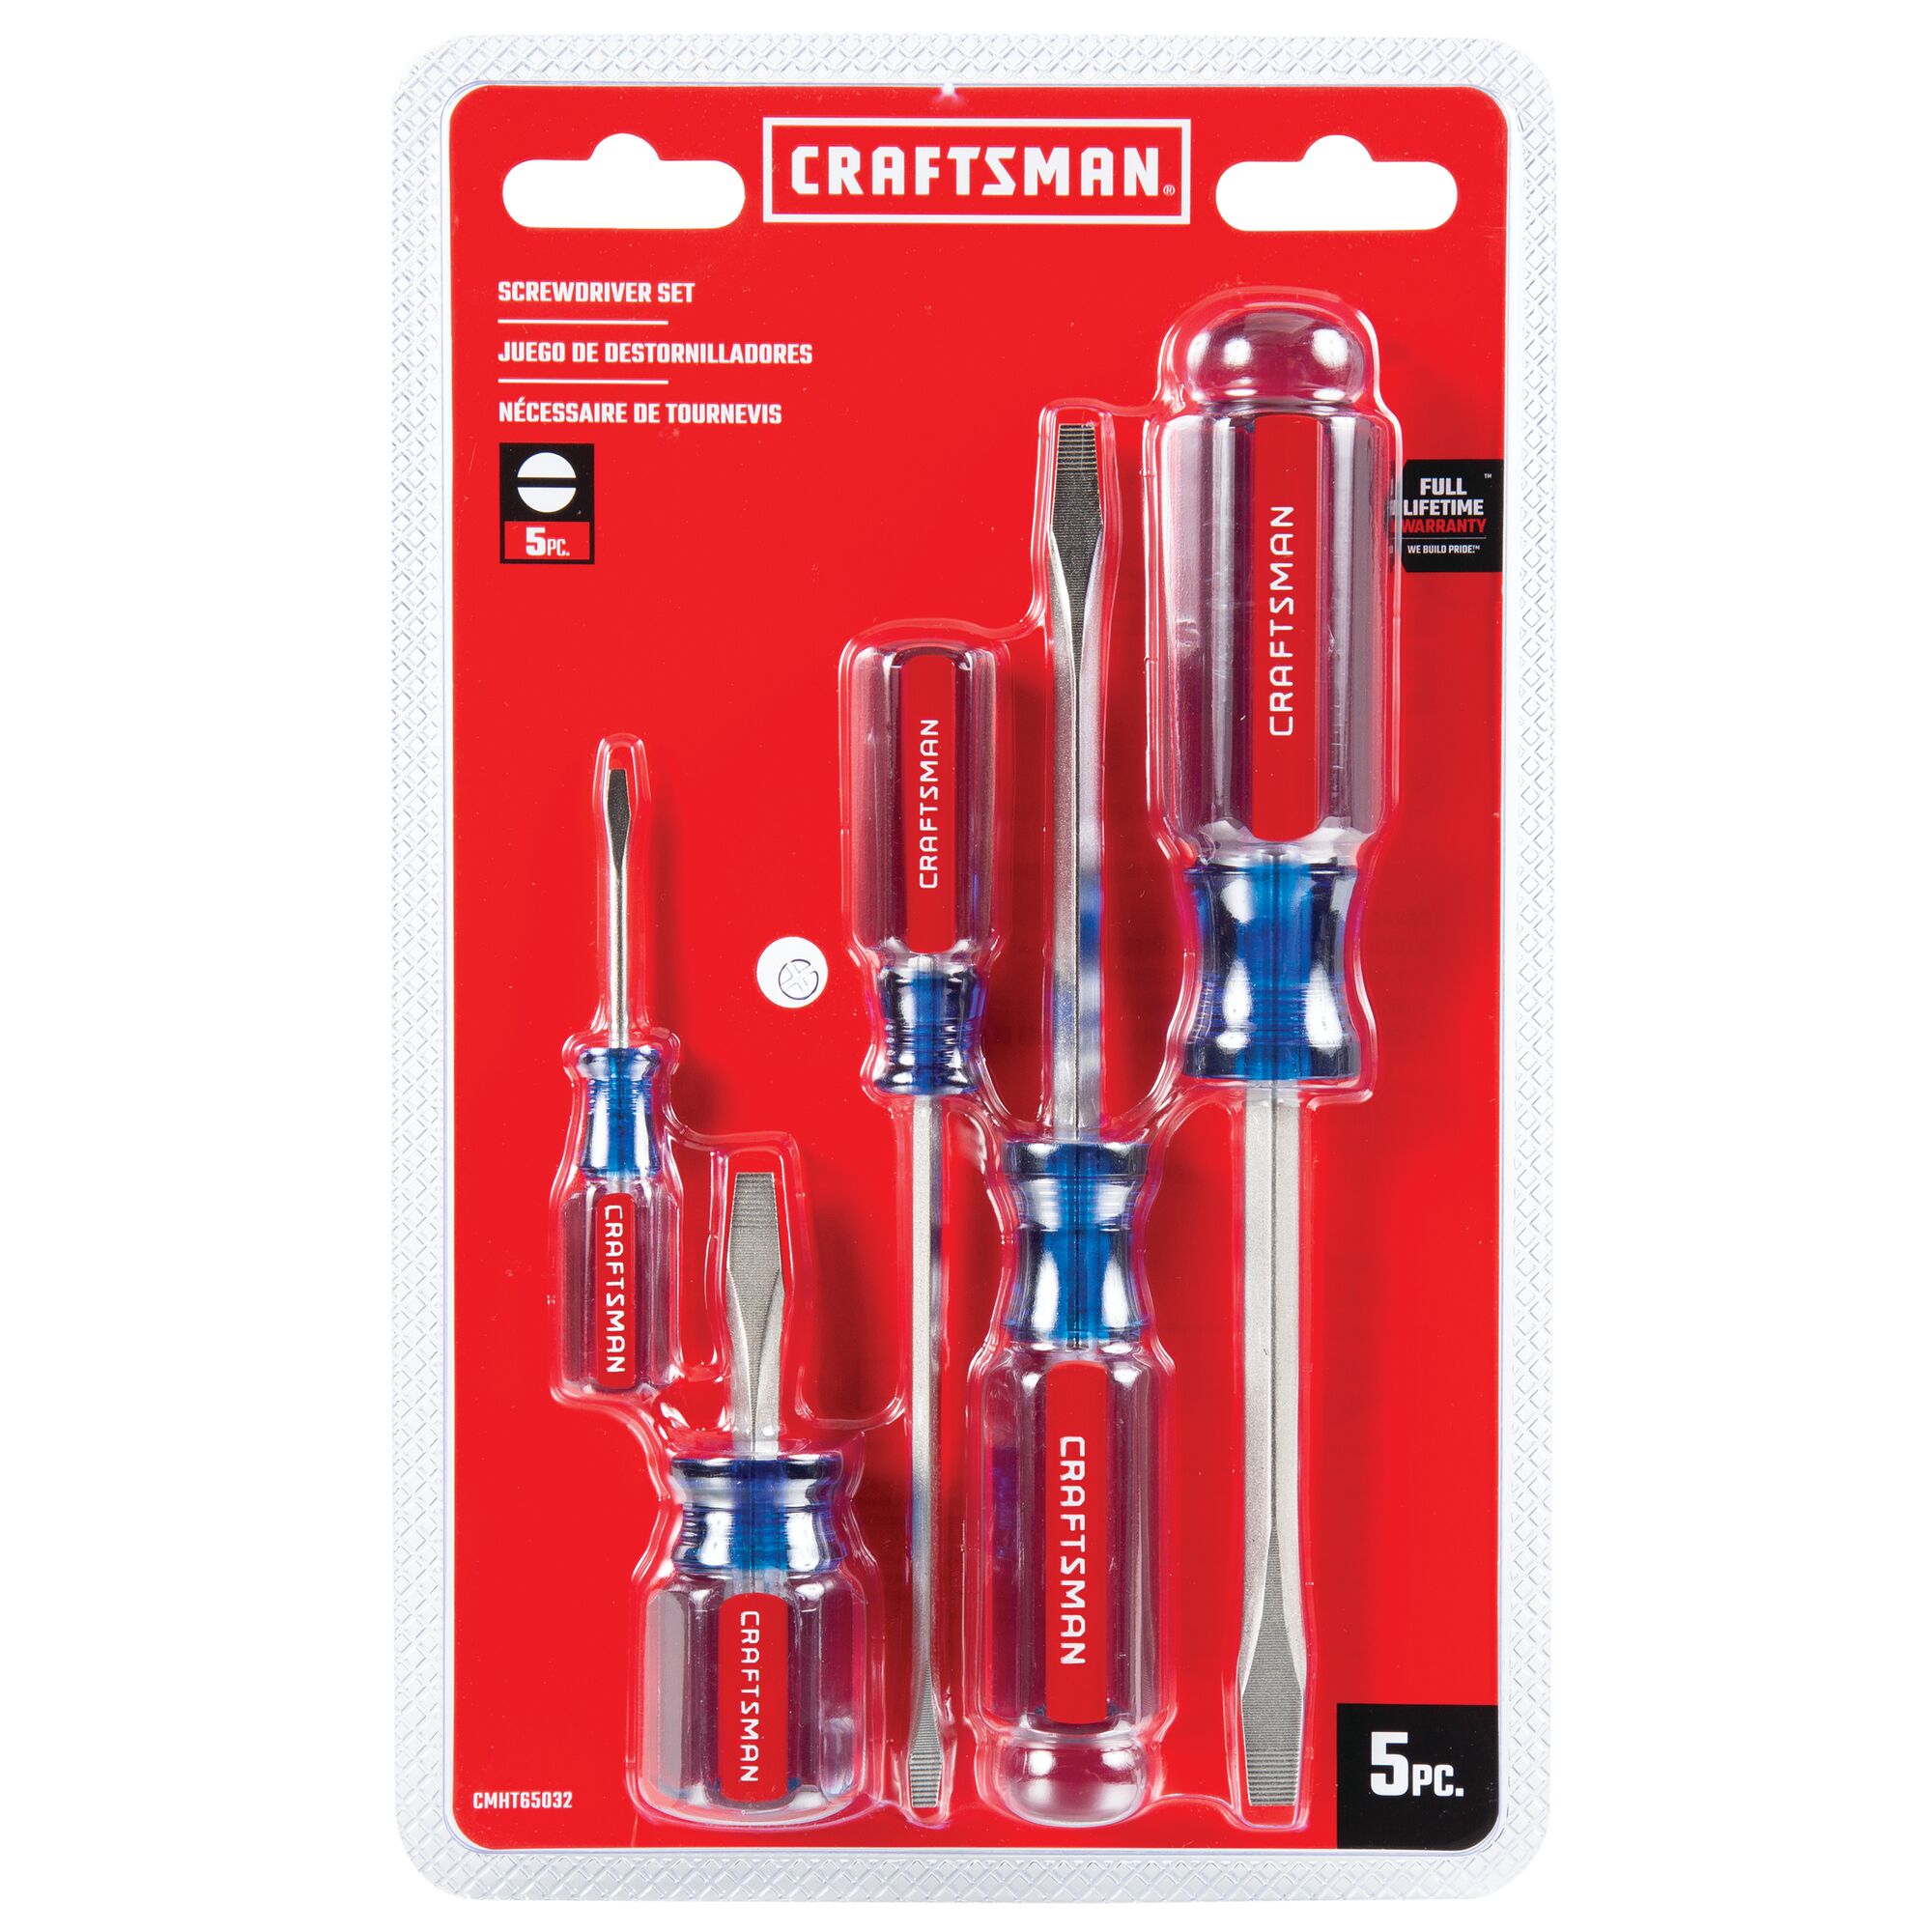 5 Piece Slotted Acetate ScrewDriver Set in carded blister packaging.